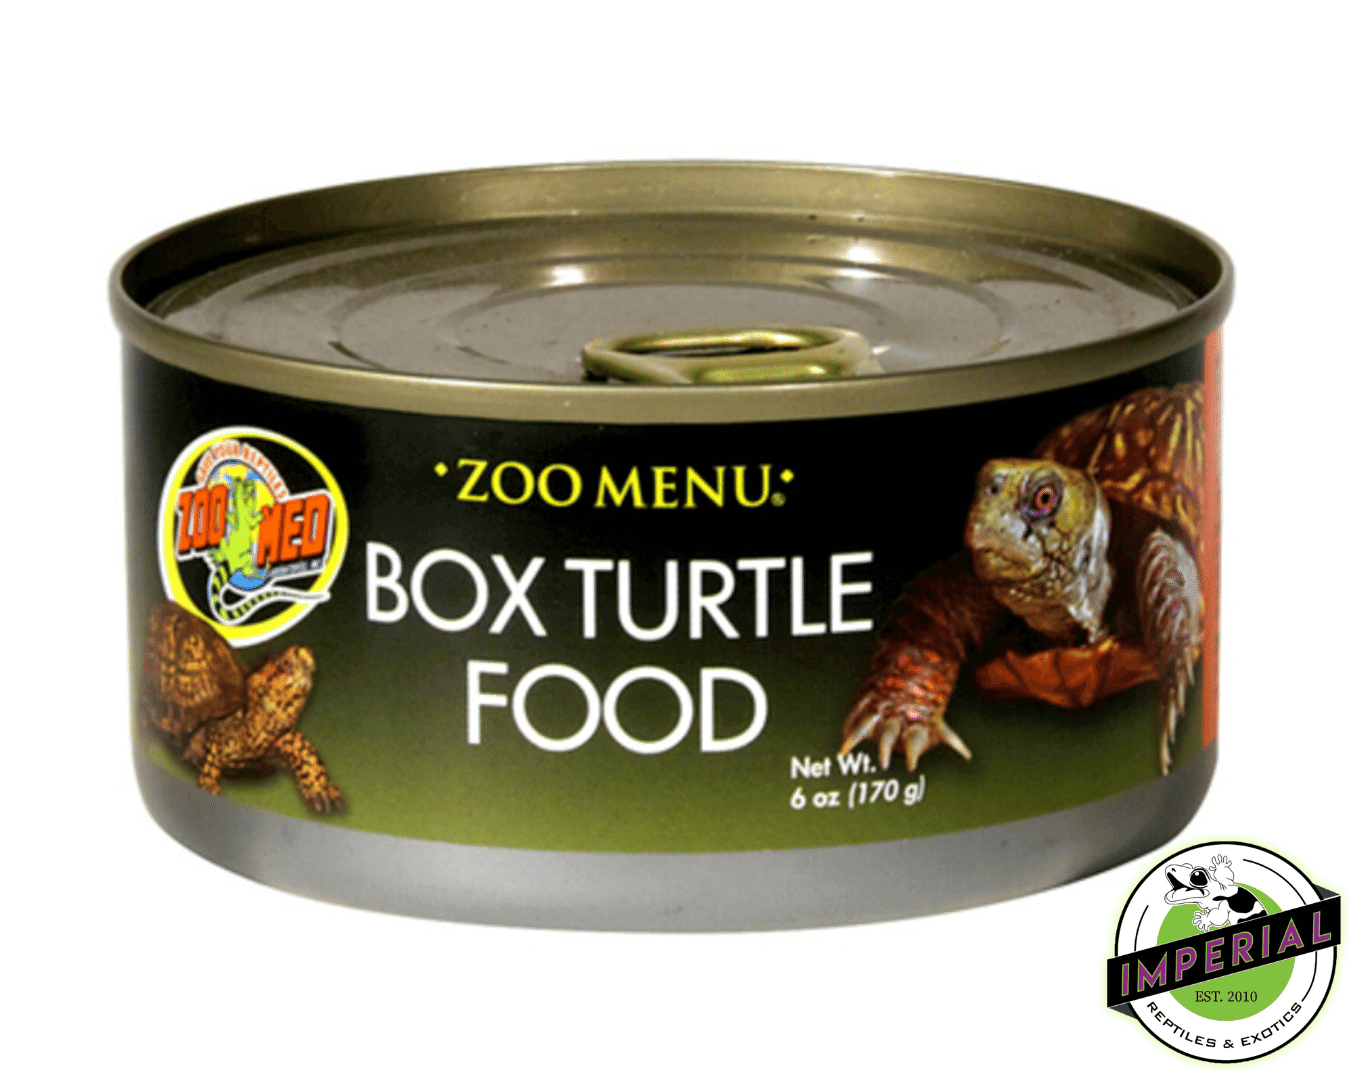 buy wet box turtle food for sale online, cheap reptile supplies near me